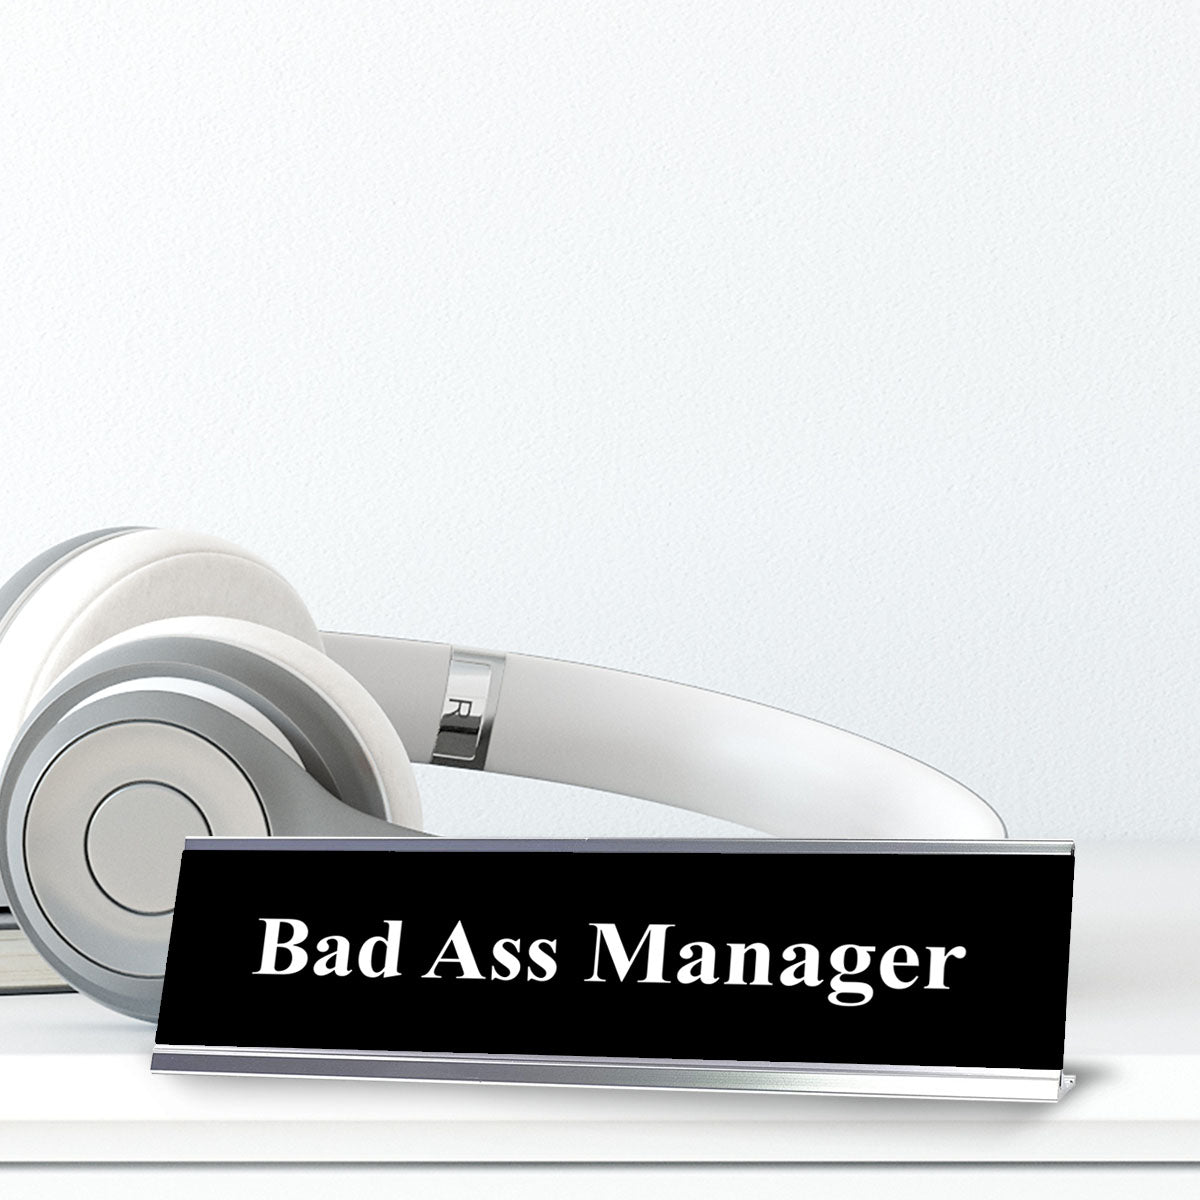 Bad Ass Manager, Black and White Office Gift Desk Sign (2 x 8")